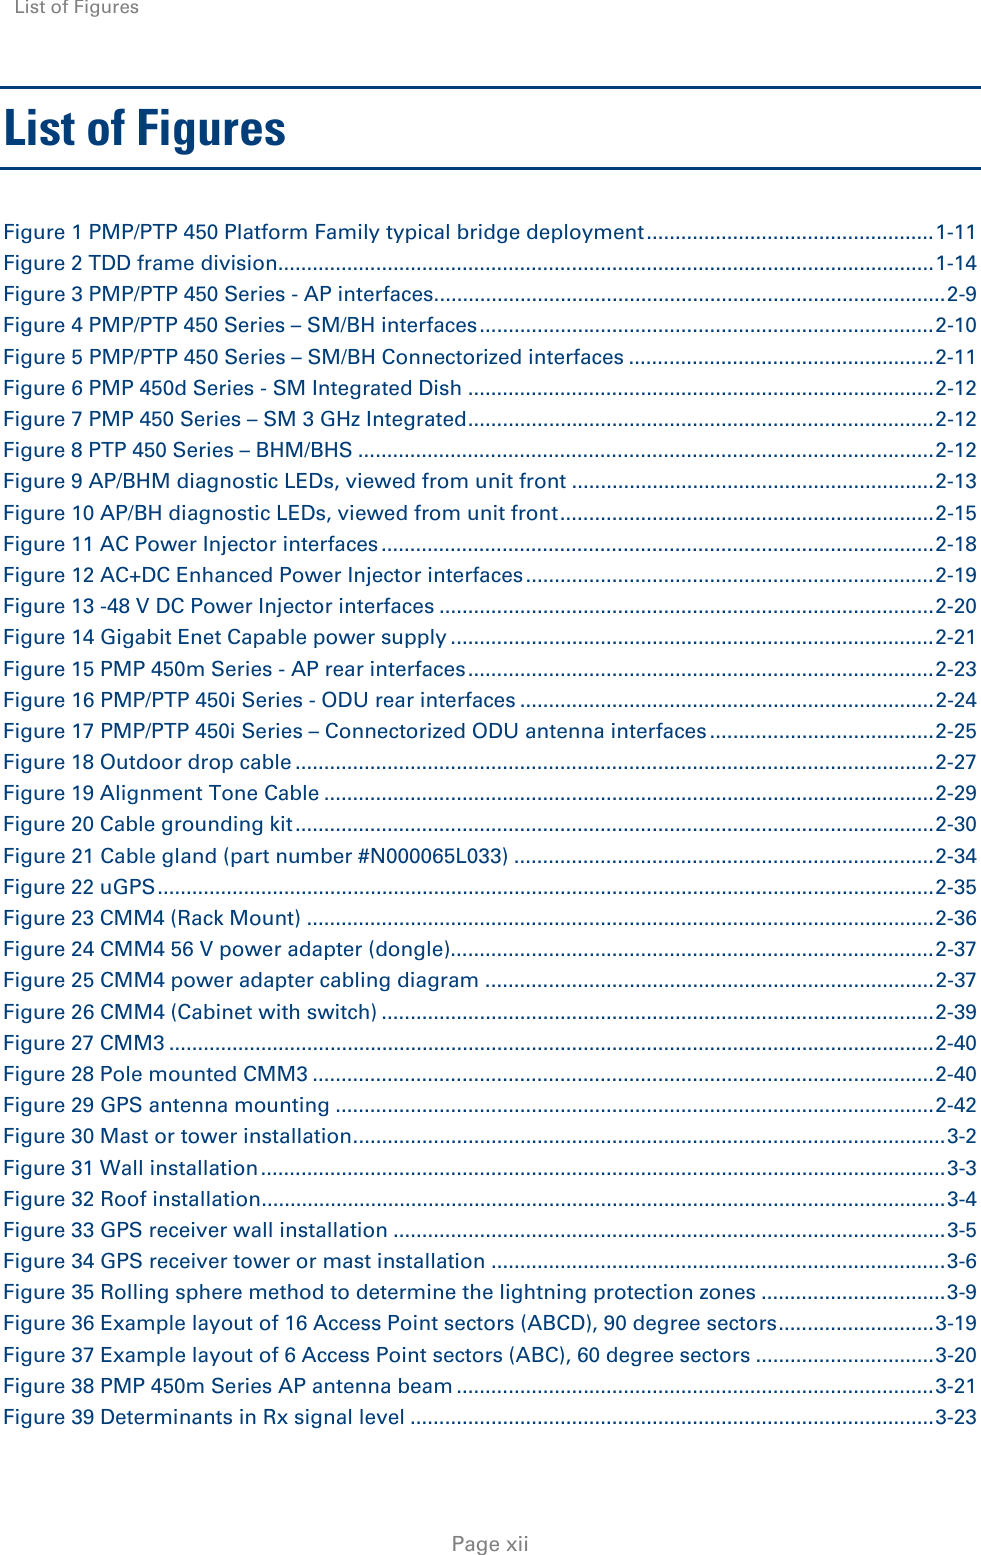 List of Figures     Page xii List of Figures Figure 1 PMP/PTP 450 Platform Family typical bridge deployment .................................................. 1-11 Figure 2 TDD frame division.................................................................................................................. 1-14 Figure 3 PMP/PTP 450 Series - AP interfaces ......................................................................................... 2-9 Figure 4 PMP/PTP 450 Series – SM/BH interfaces ............................................................................... 2-10 Figure 5 PMP/PTP 450 Series – SM/BH Connectorized interfaces ..................................................... 2-11 Figure 6 PMP 450d Series - SM Integrated Dish ................................................................................. 2-12 Figure 7 PMP 450 Series – SM 3 GHz Integrated ................................................................................. 2-12 Figure 8 PTP 450 Series – BHM/BHS .................................................................................................... 2-12 Figure 9 AP/BHM diagnostic LEDs, viewed from unit front ............................................................... 2-13 Figure 10 AP/BH diagnostic LEDs, viewed from unit front ................................................................. 2-15 Figure 11 AC Power Injector interfaces ................................................................................................ 2-18 Figure 12 AC+DC Enhanced Power Injector interfaces ....................................................................... 2-19 Figure 13 -48 V DC Power Injector interfaces ...................................................................................... 2-20 Figure 14 Gigabit Enet Capable power supply .................................................................................... 2-21 Figure 15 PMP 450m Series - AP rear interfaces ................................................................................. 2-23 Figure 16 PMP/PTP 450i Series - ODU rear interfaces ........................................................................ 2-24 Figure 17 PMP/PTP 450i Series – Connectorized ODU antenna interfaces ....................................... 2-25 Figure 18 Outdoor drop cable ............................................................................................................... 2-27 Figure 19 Alignment Tone Cable .......................................................................................................... 2-29 Figure 20 Cable grounding kit ............................................................................................................... 2-30 Figure 21 Cable gland (part number #N000065L033) ......................................................................... 2-34 Figure 22 uGPS ....................................................................................................................................... 2-35 Figure 23 CMM4 (Rack Mount) ............................................................................................................. 2-36 Figure 24 CMM4 56 V power adapter (dongle).................................................................................... 2-37 Figure 25 CMM4 power adapter cabling diagram .............................................................................. 2-37 Figure 26 CMM4 (Cabinet with switch) ................................................................................................ 2-39 Figure 27 CMM3 ..................................................................................................................................... 2-40 Figure 28 Pole mounted CMM3 ............................................................................................................ 2-40 Figure 29 GPS antenna mounting ........................................................................................................ 2-42 Figure 30 Mast or tower installation ....................................................................................................... 3-2 Figure 31 Wall installation ....................................................................................................................... 3-3 Figure 32 Roof installation ....................................................................................................................... 3-4 Figure 33 GPS receiver wall installation ................................................................................................ 3-5 Figure 34 GPS receiver tower or mast installation ............................................................................... 3-6 Figure 35 Rolling sphere method to determine the lightning protection zones ................................ 3-9 Figure 36 Example layout of 16 Access Point sectors (ABCD), 90 degree sectors ........................... 3-19 Figure 37 Example layout of 6 Access Point sectors (ABC), 60 degree sectors ............................... 3-20 Figure 38 PMP 450m Series AP antenna beam ................................................................................... 3-21 Figure 39 Determinants in Rx signal level ........................................................................................... 3-23 